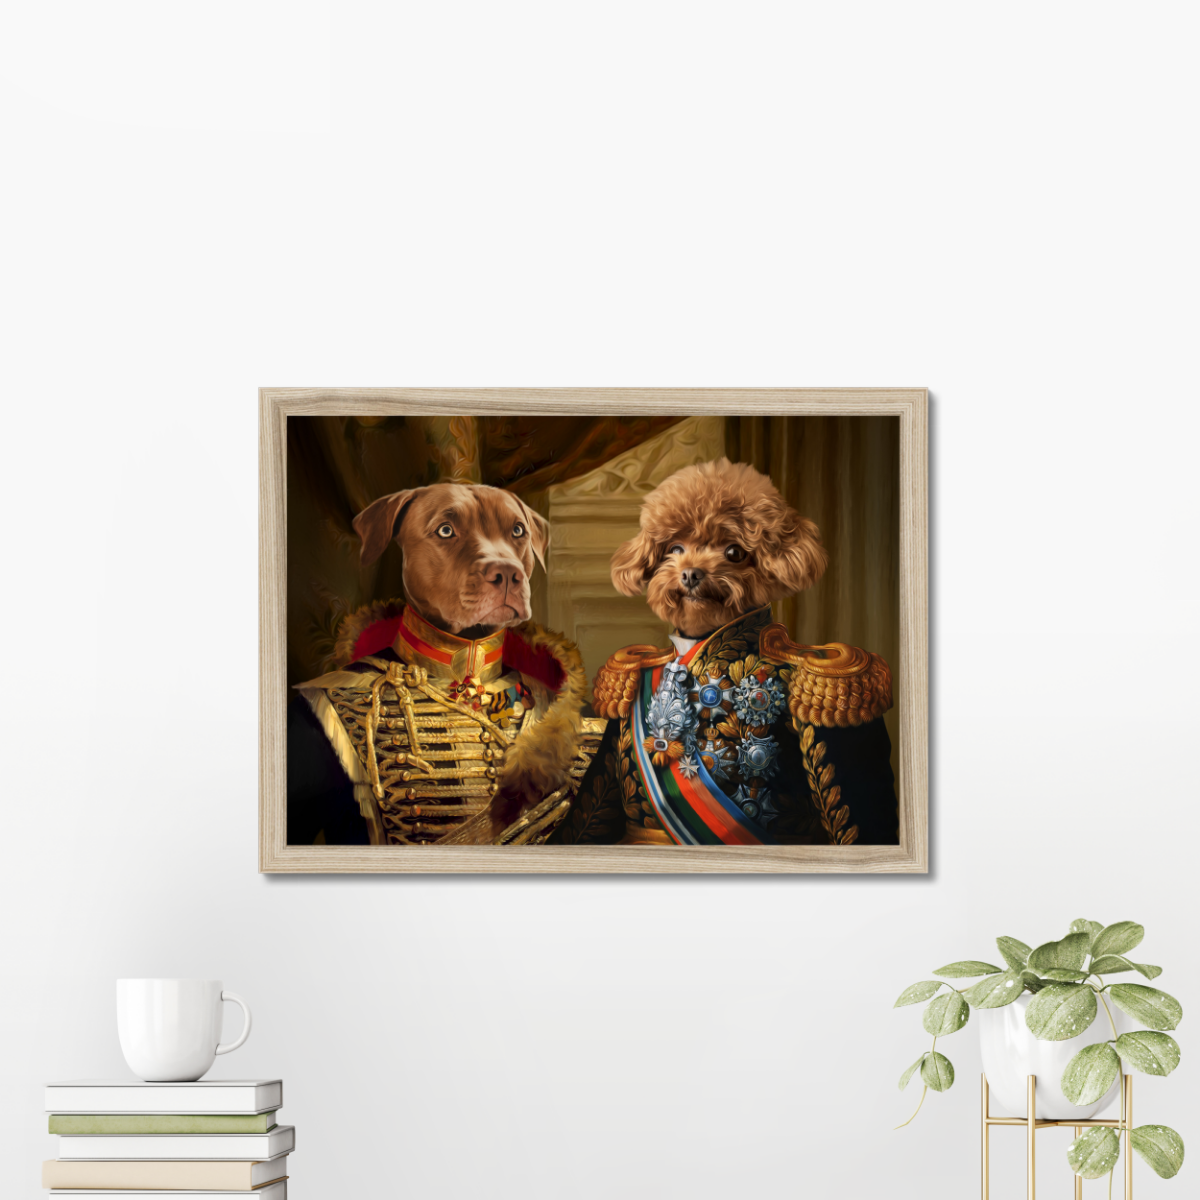 Paw & Glory, paw and glory, pet portrait admiral, funny dog paintings, pictures for pets, painting pets, dog astronaut photo, pet portrait admiral, pet portraits